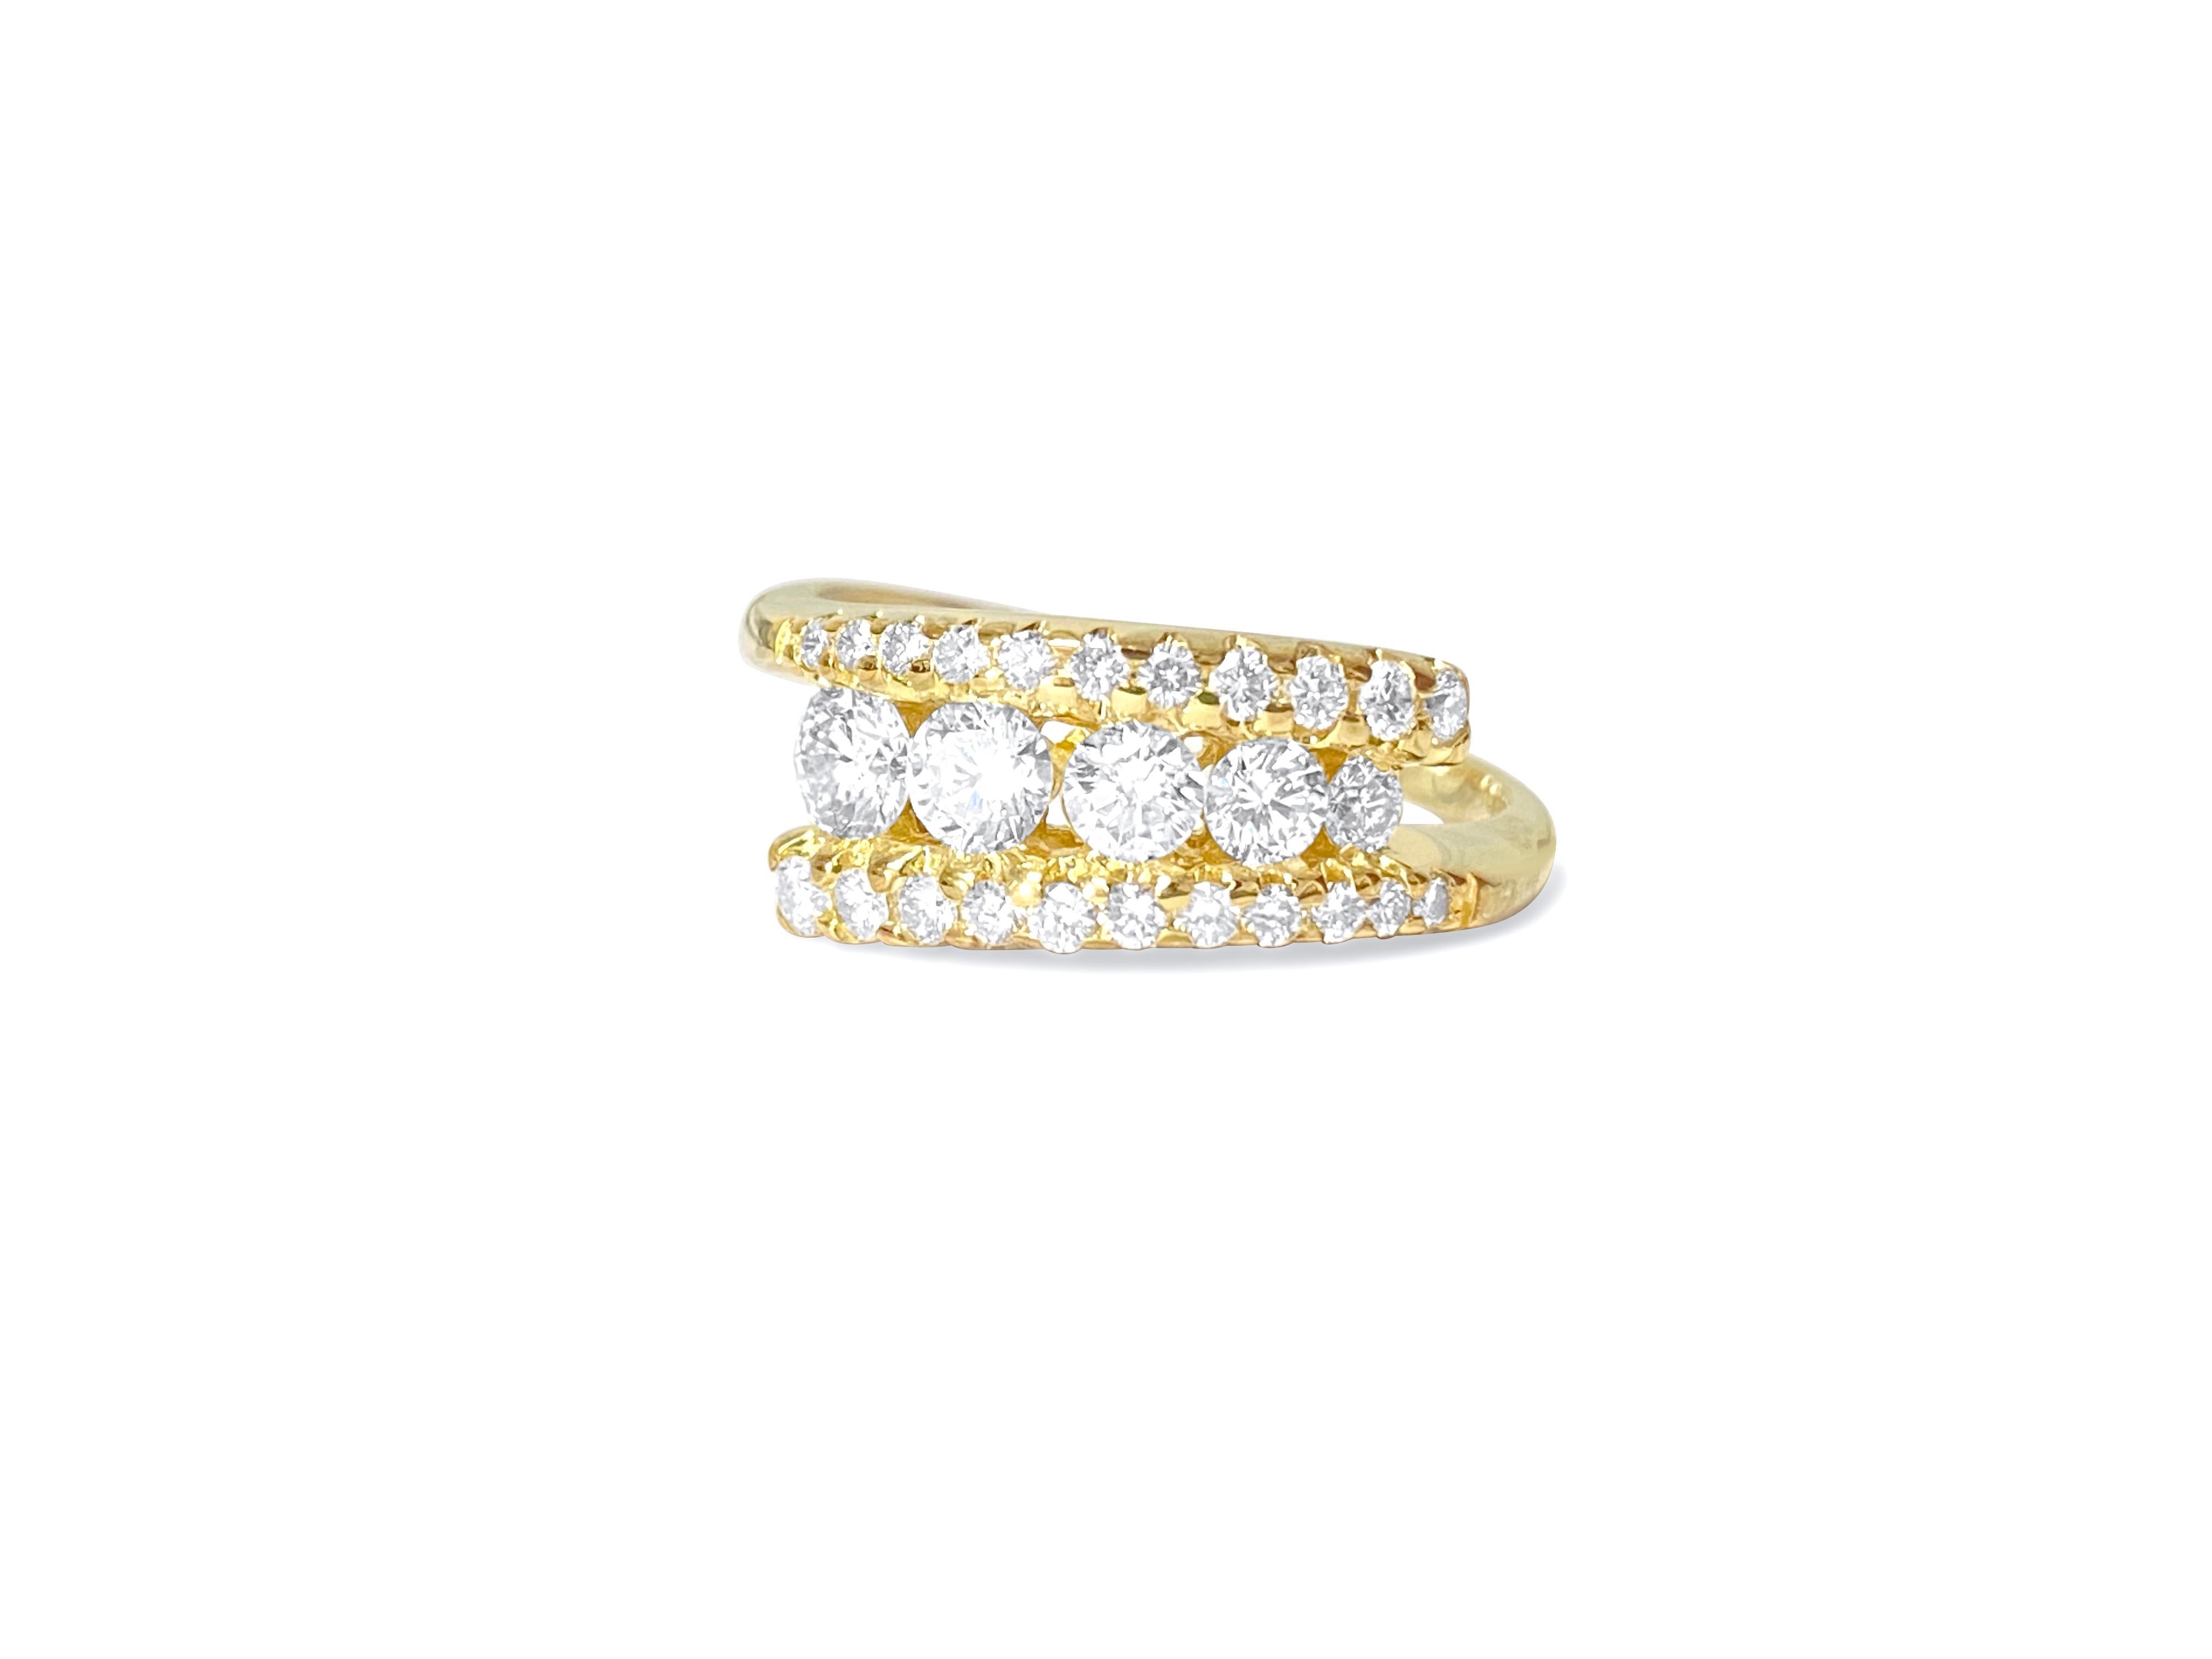 This ring is made of 14-karat yellow gold. It has diamonds that weigh 1.10 carats in total. The diamonds are clear and shiny, with a color range from F to G. They are cut in a round brilliant style. These diamonds are 100% natural and were mined